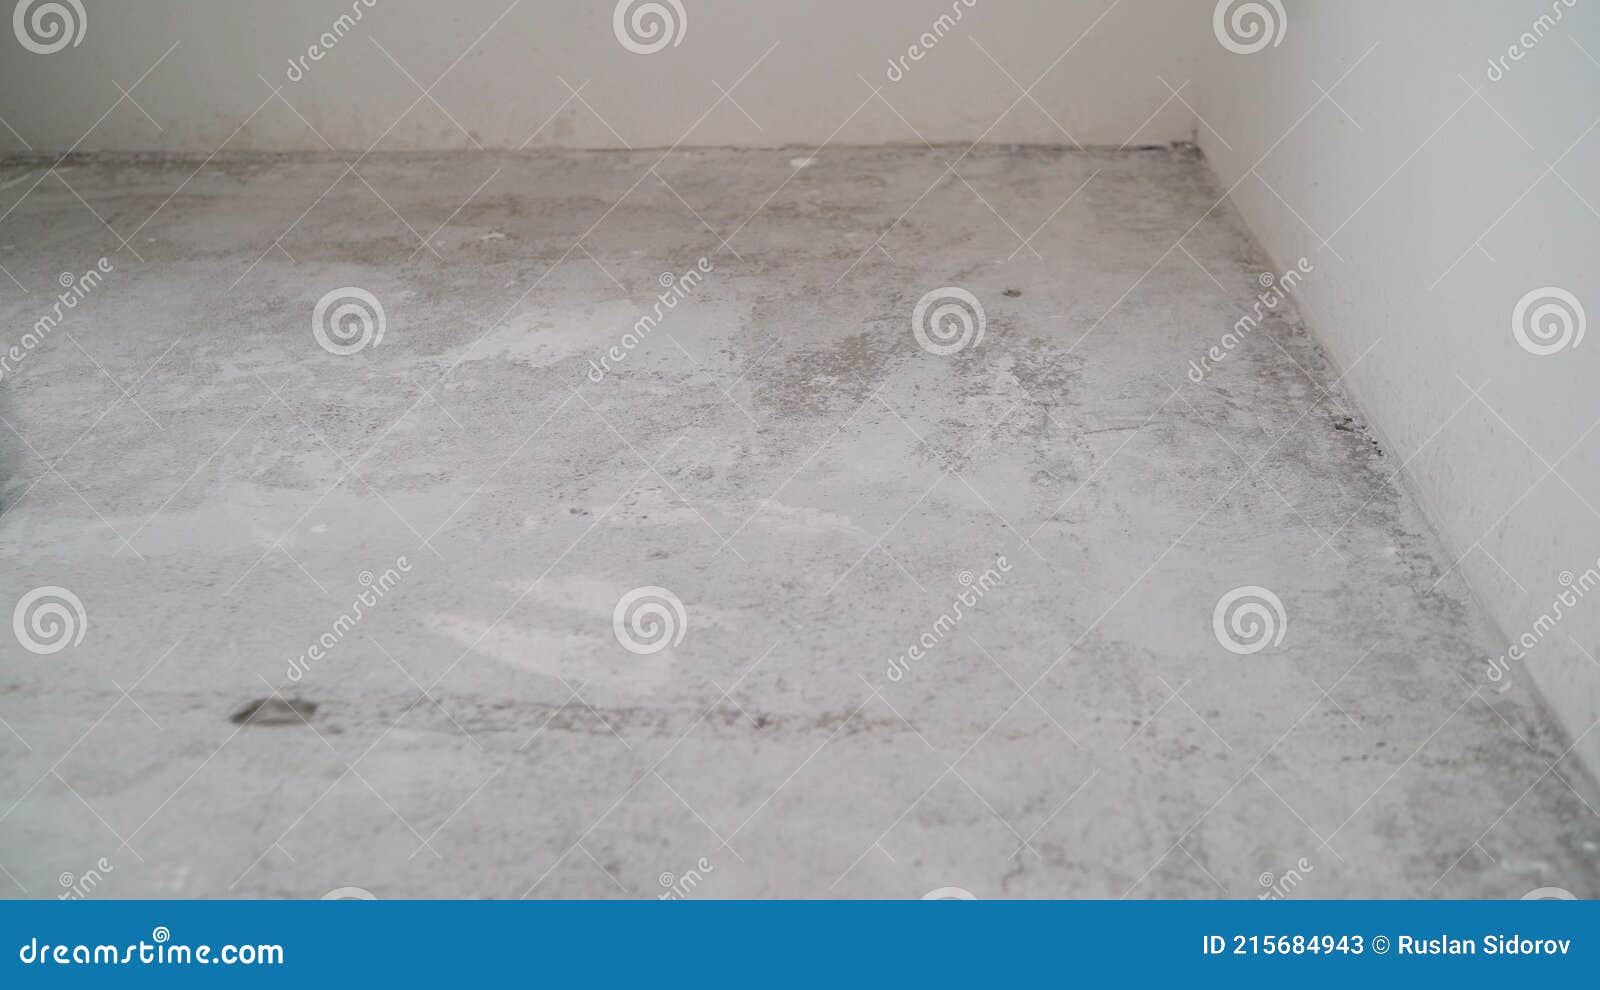 concrete floor in a new apartment. concrete floor before processing. unfinished building interior, detail of a white